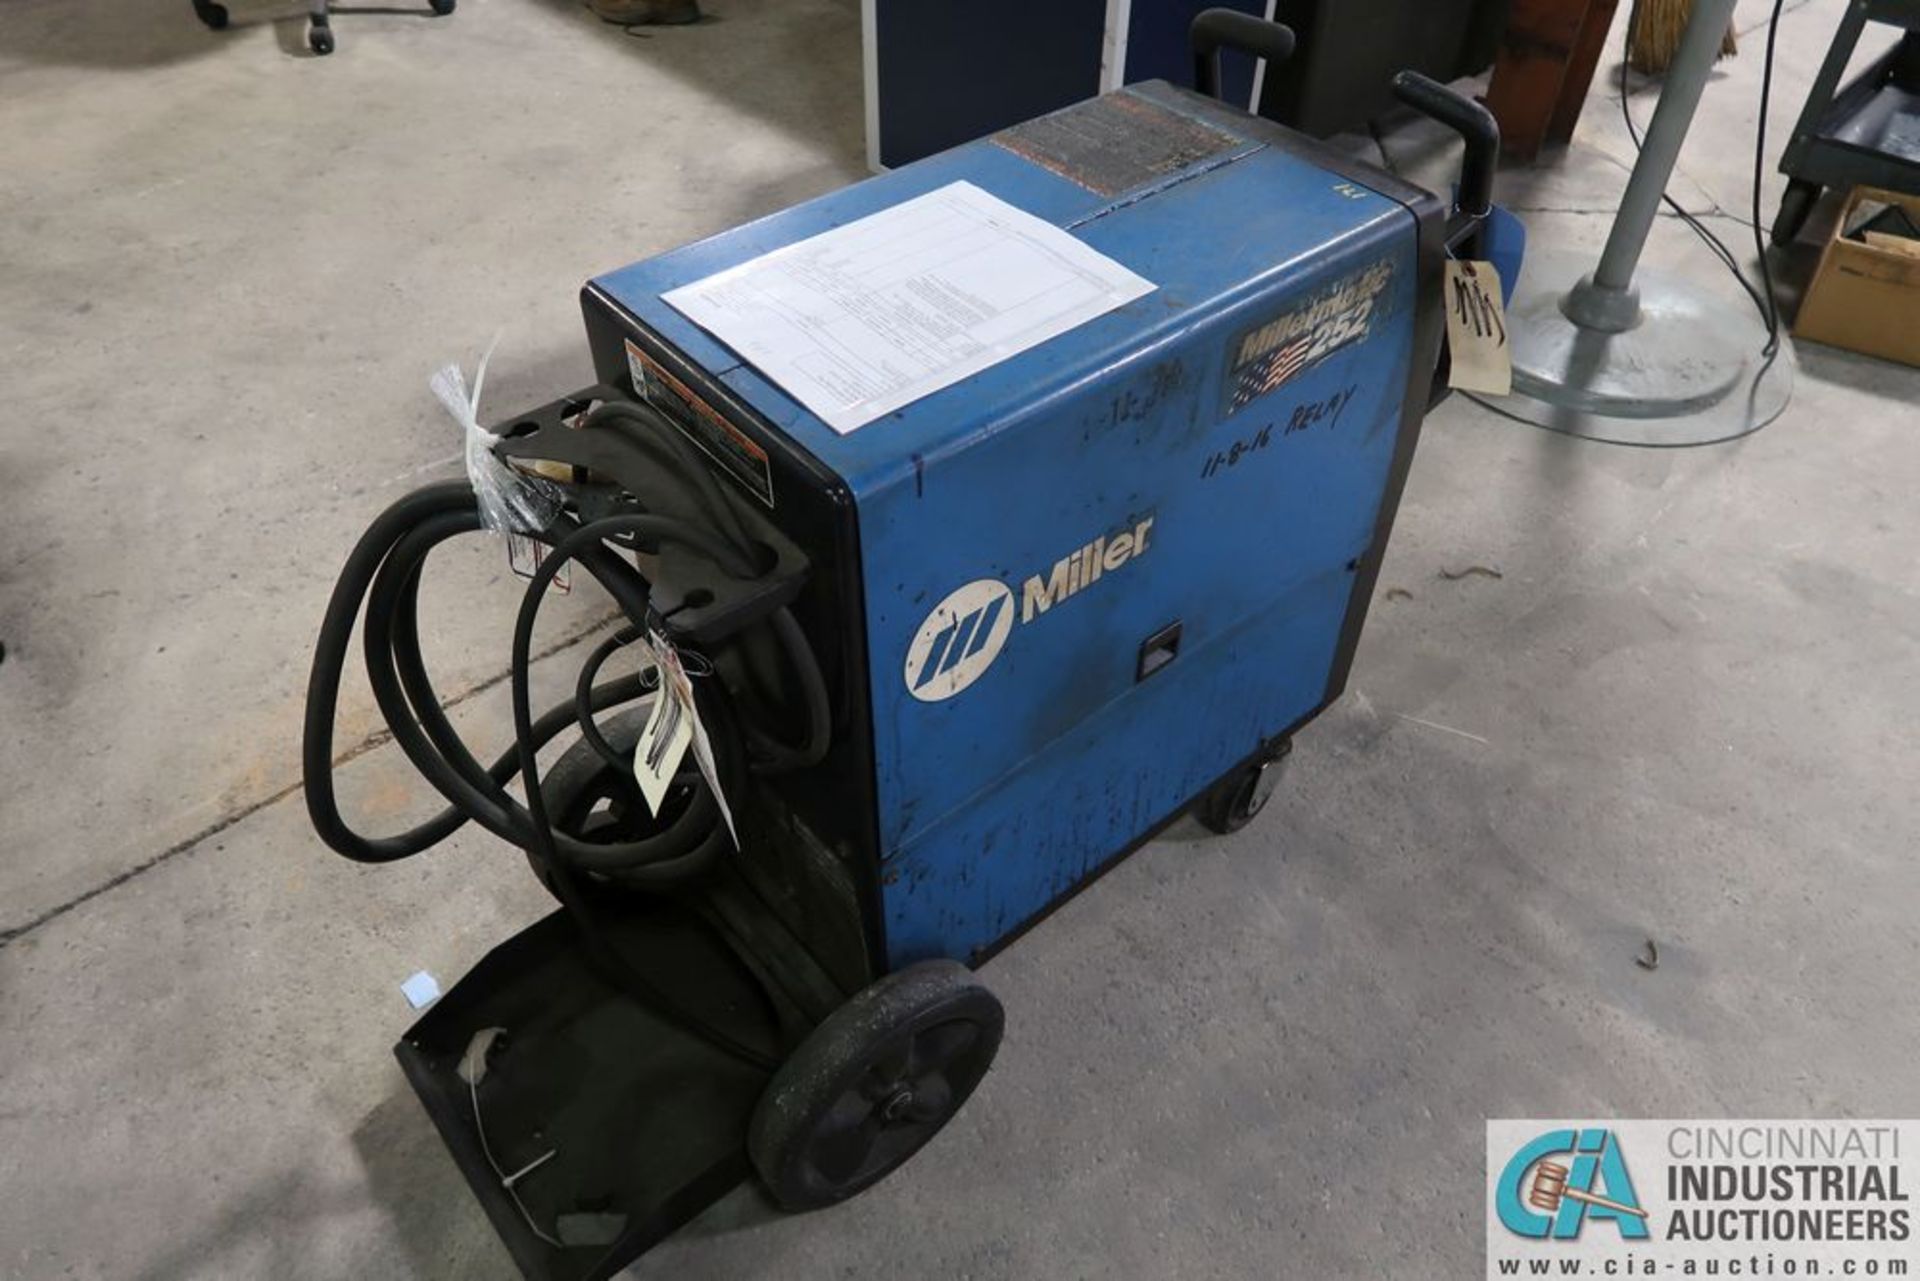 250 AMP MILLER MODEL MILLERMATIC 252 MIG WELDING POWER SOURCE; S/N MB240158N, WITH BUILT-IN WIRE - Image 3 of 7